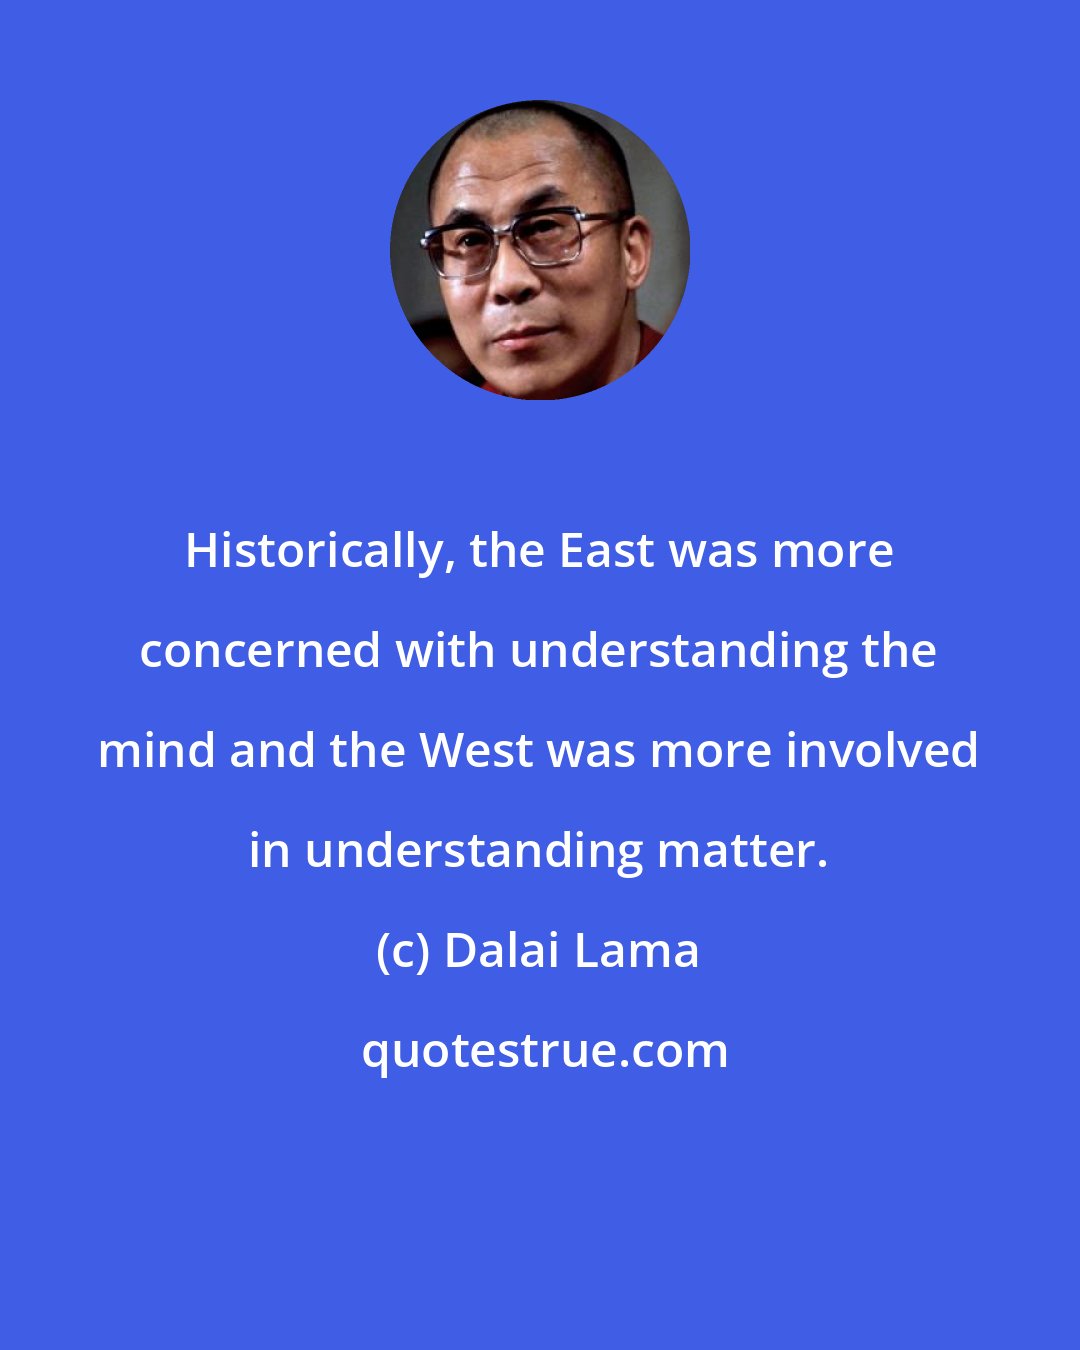 Dalai Lama: Historically, the East was more concerned with understanding the mind and the West was more involved in understanding matter.